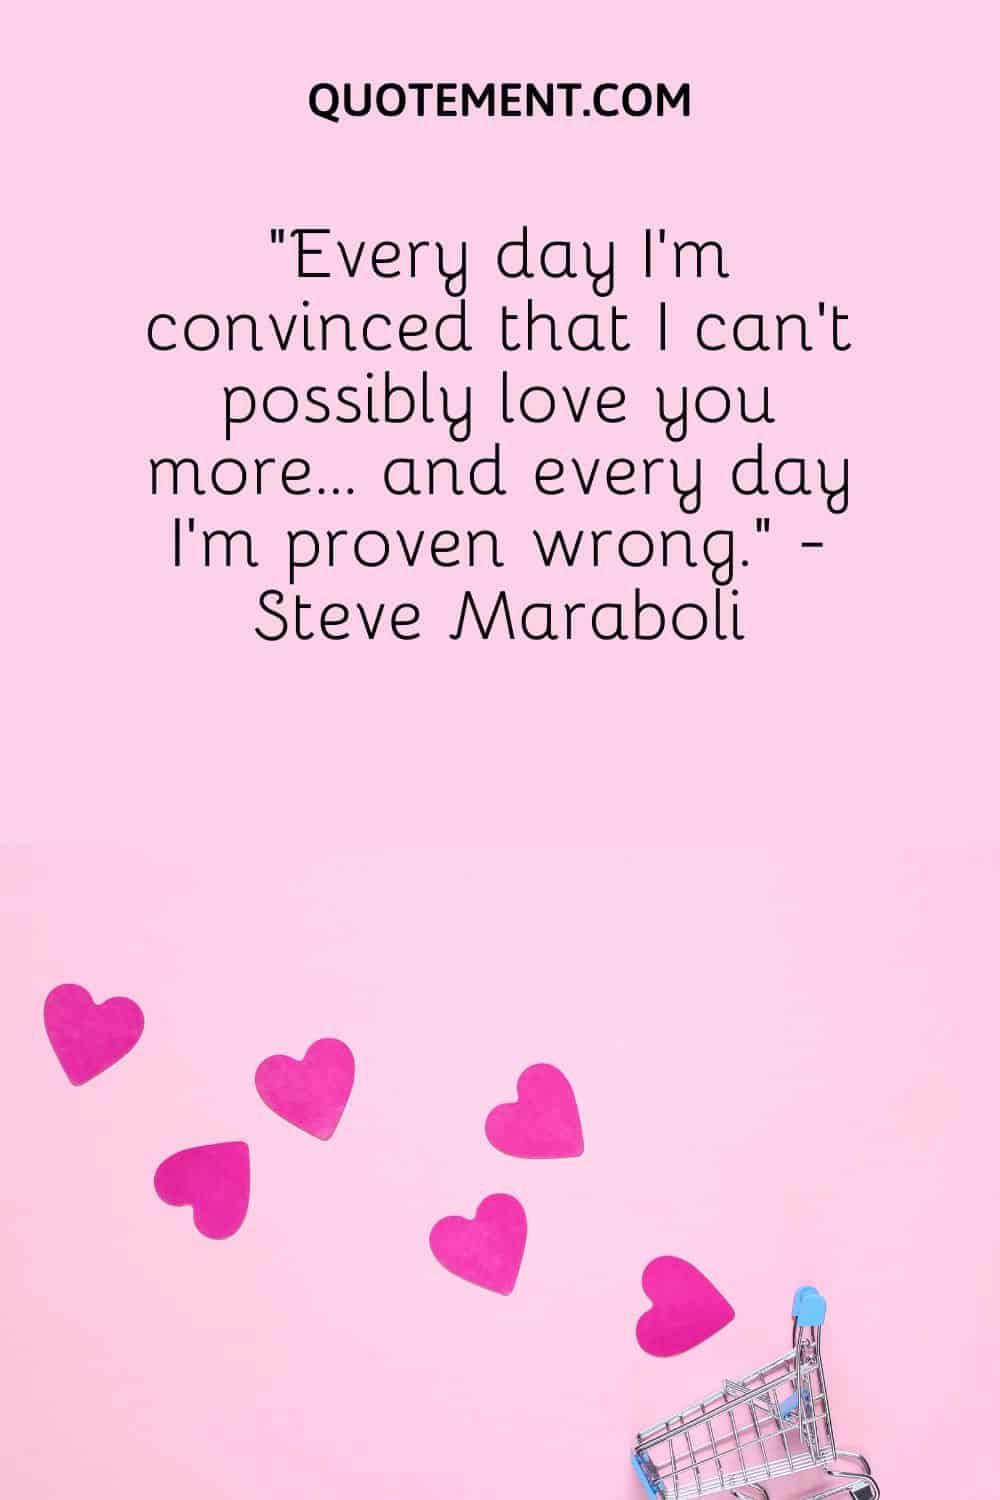 “Every day I’m convinced that I can’t possibly love you more… and every day I’m proven wrong.” - Steve Maraboli